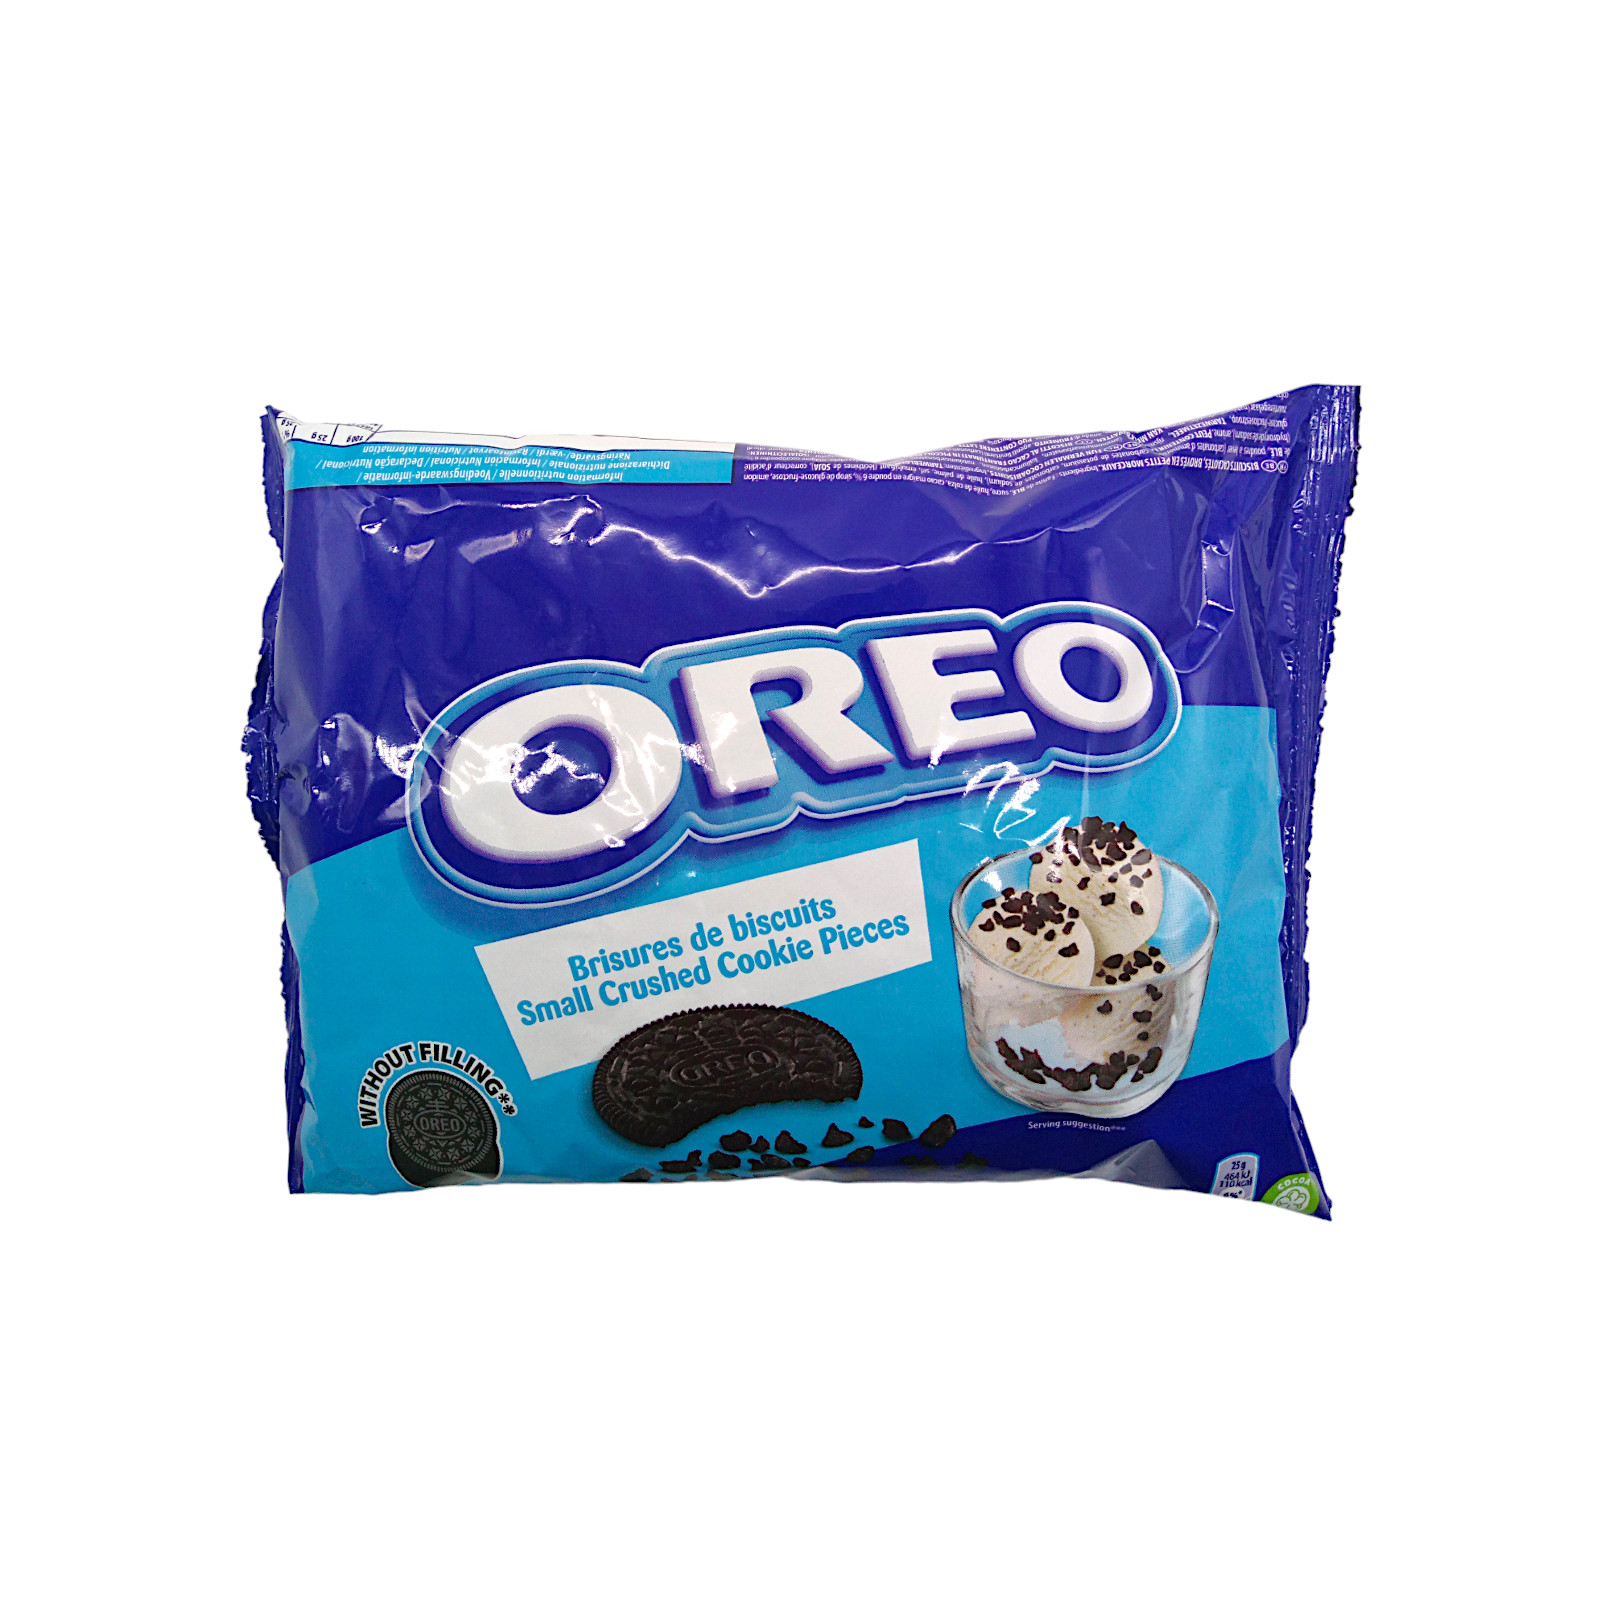 Oreo Small Crushed Pieces 400g